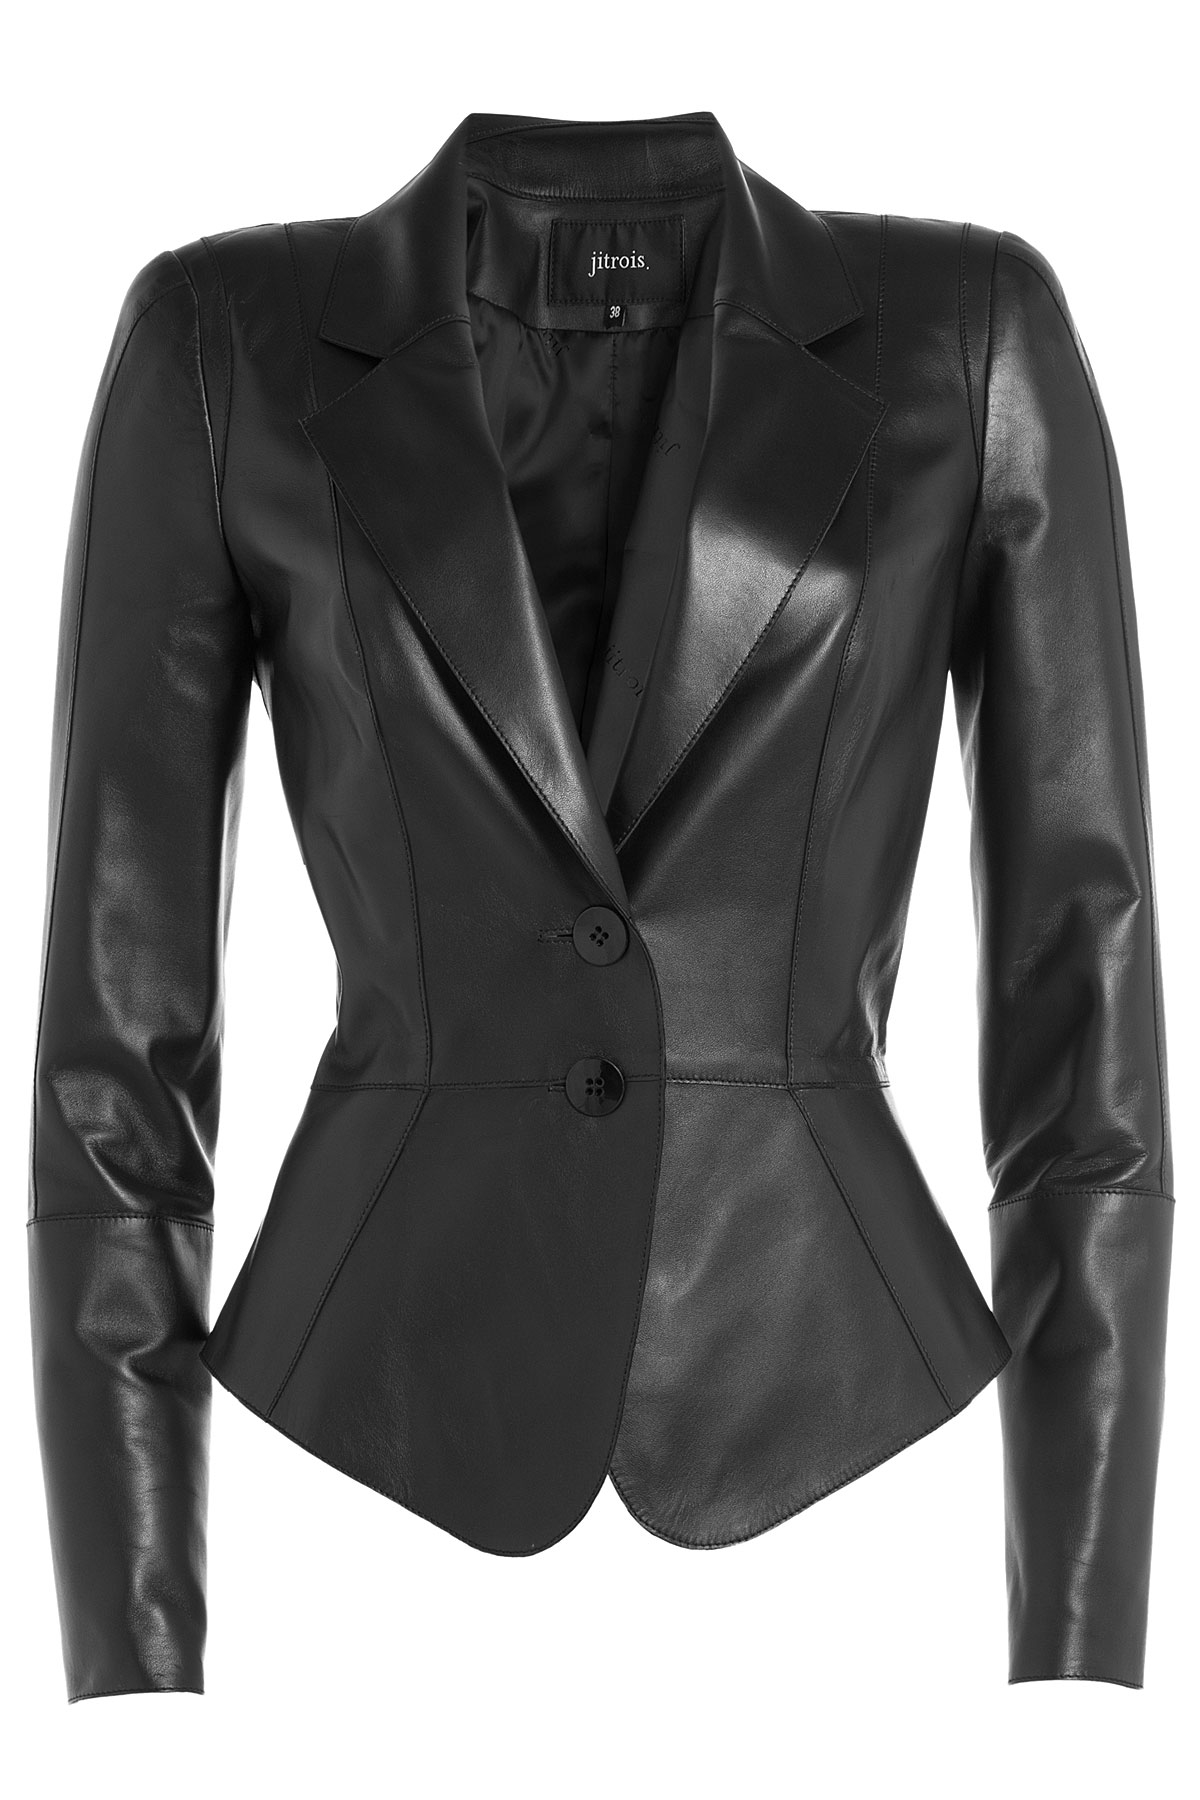 Jitrois Fitted Leather Blazer in Black | Lyst